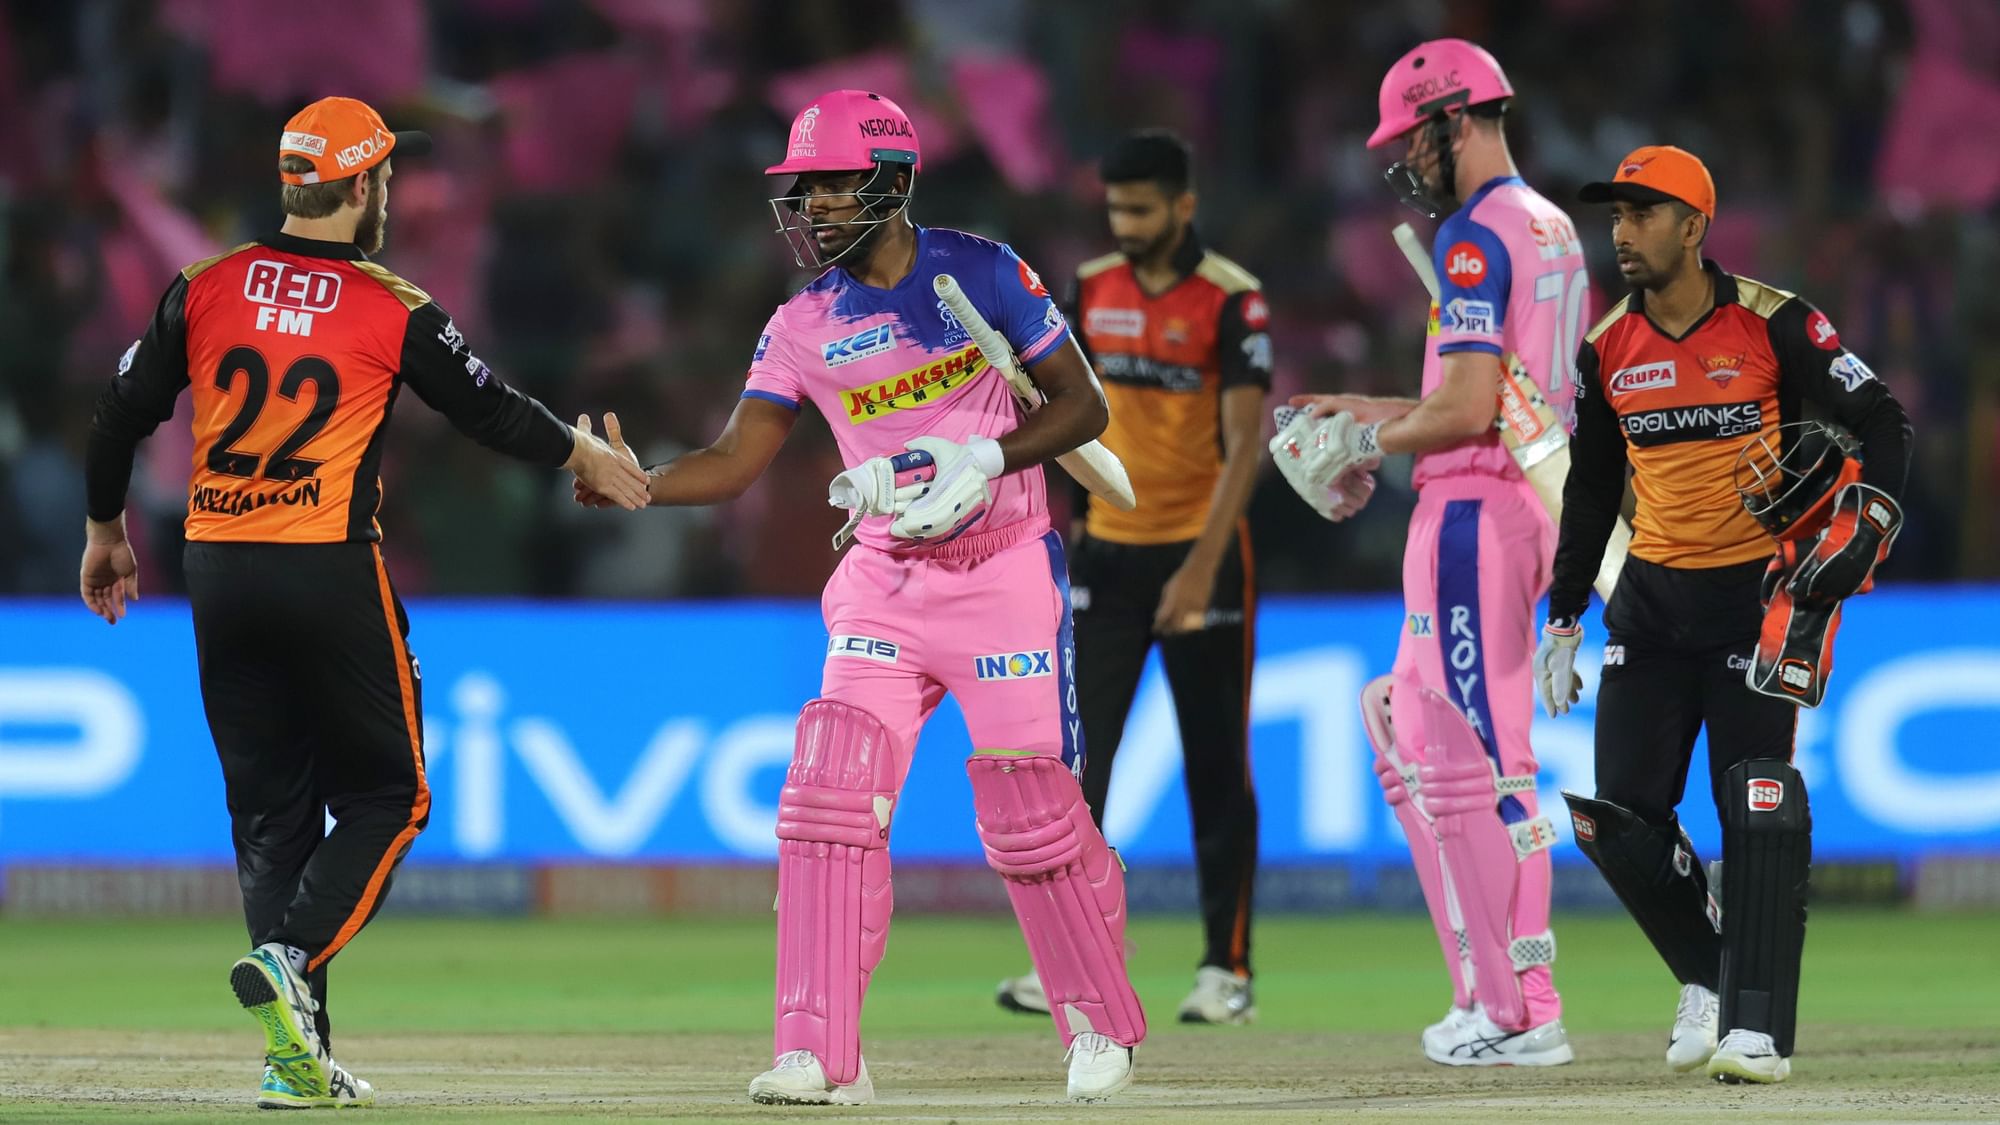 Rajasthan Royals chased down 161 against Sunrisers Hyderabad with five balls to spare.